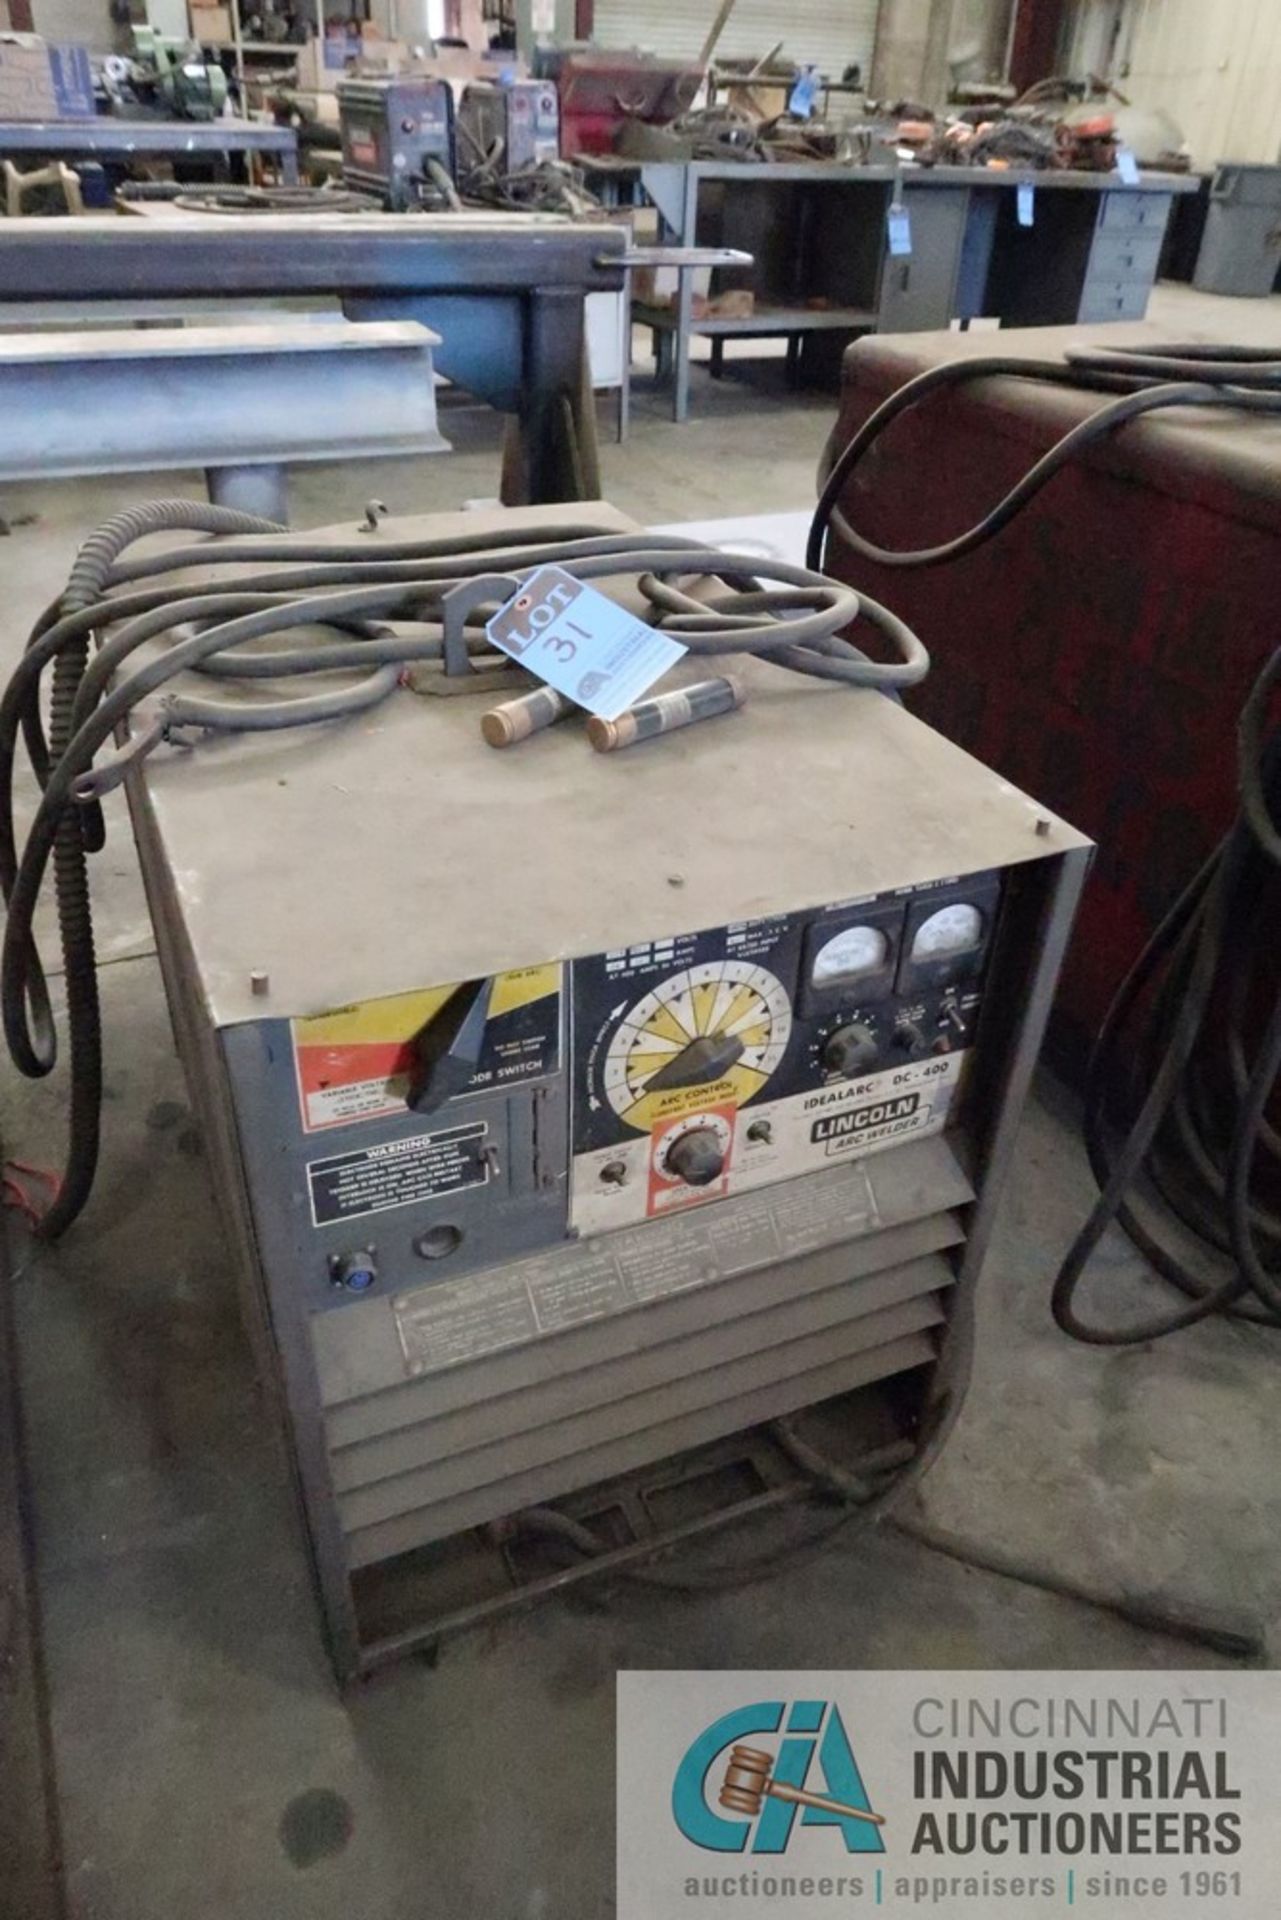 400 AMP LINCOLN ELECTRIC MODEL DC-400 ARC WELDING POWER SOURCE - Image 2 of 6